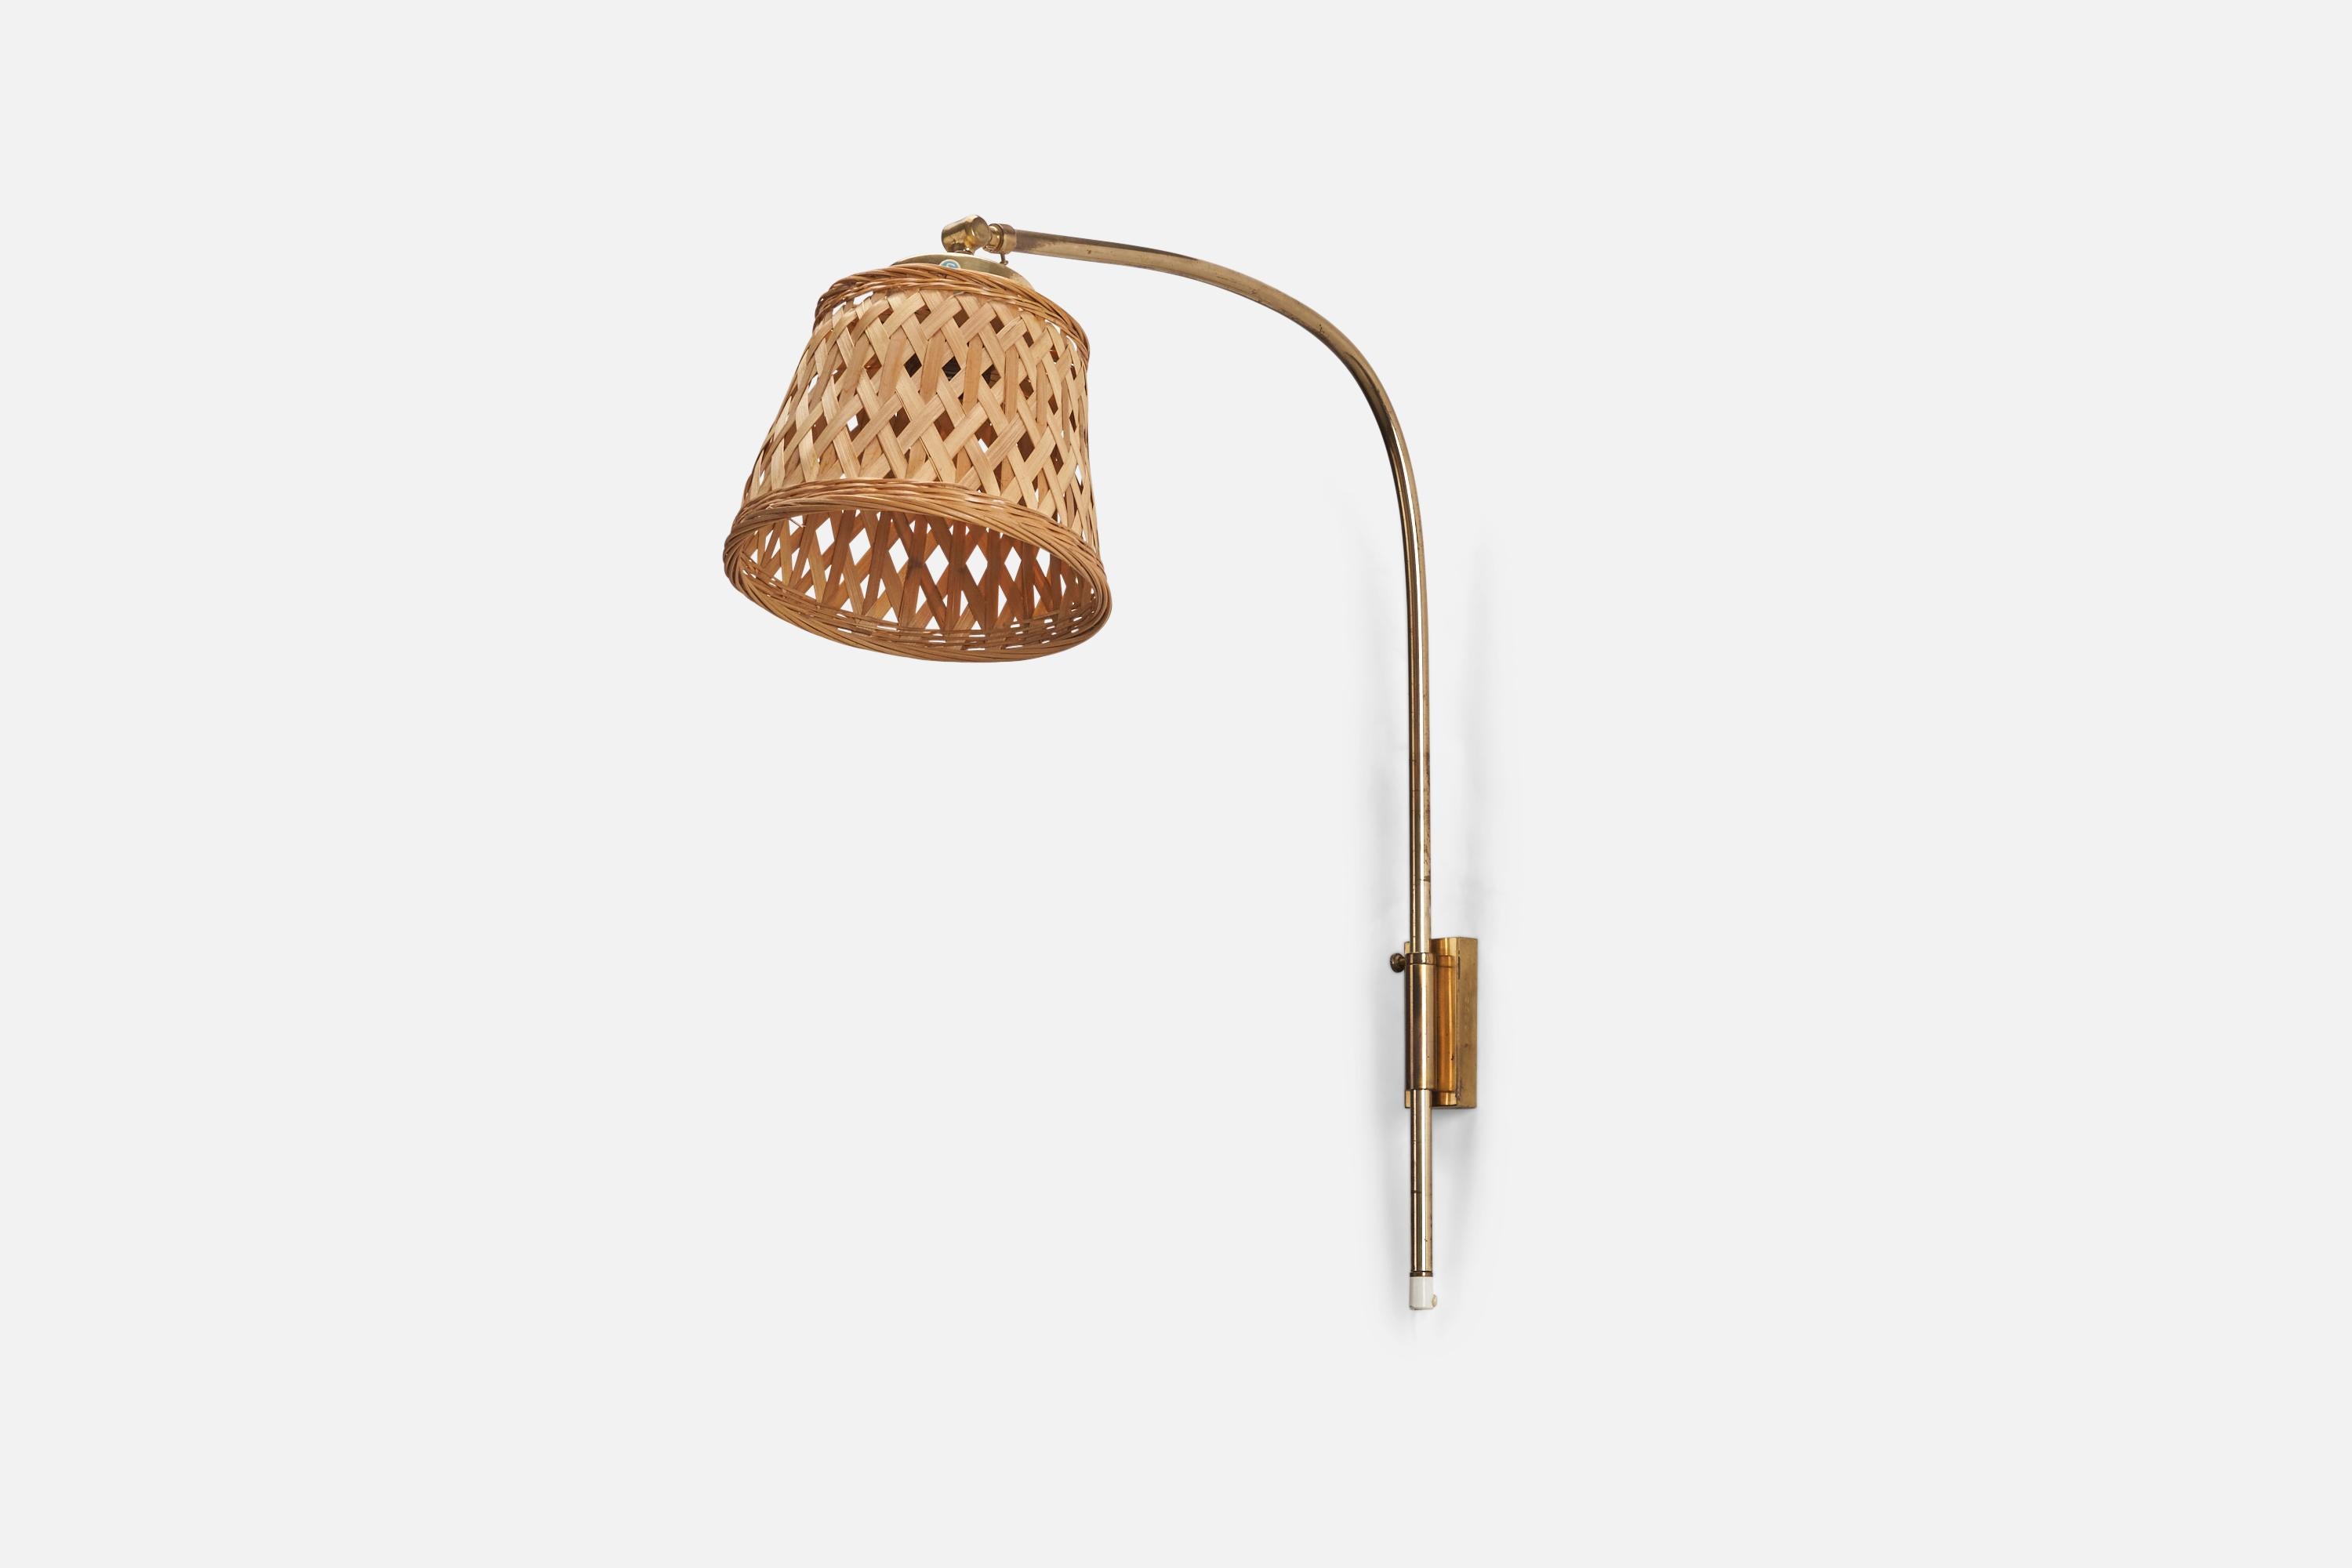 A brass and rattan wall light designed by Josef Frank and produced by Svenskt Tenn, Sweden, 1950s.

Dimensions of Back Plate (inches) : 3.9 x 1.5 x 0.7 (Height x Width x Depth)

Socket takes standard E-26 medium base bulb.

There is no maximum